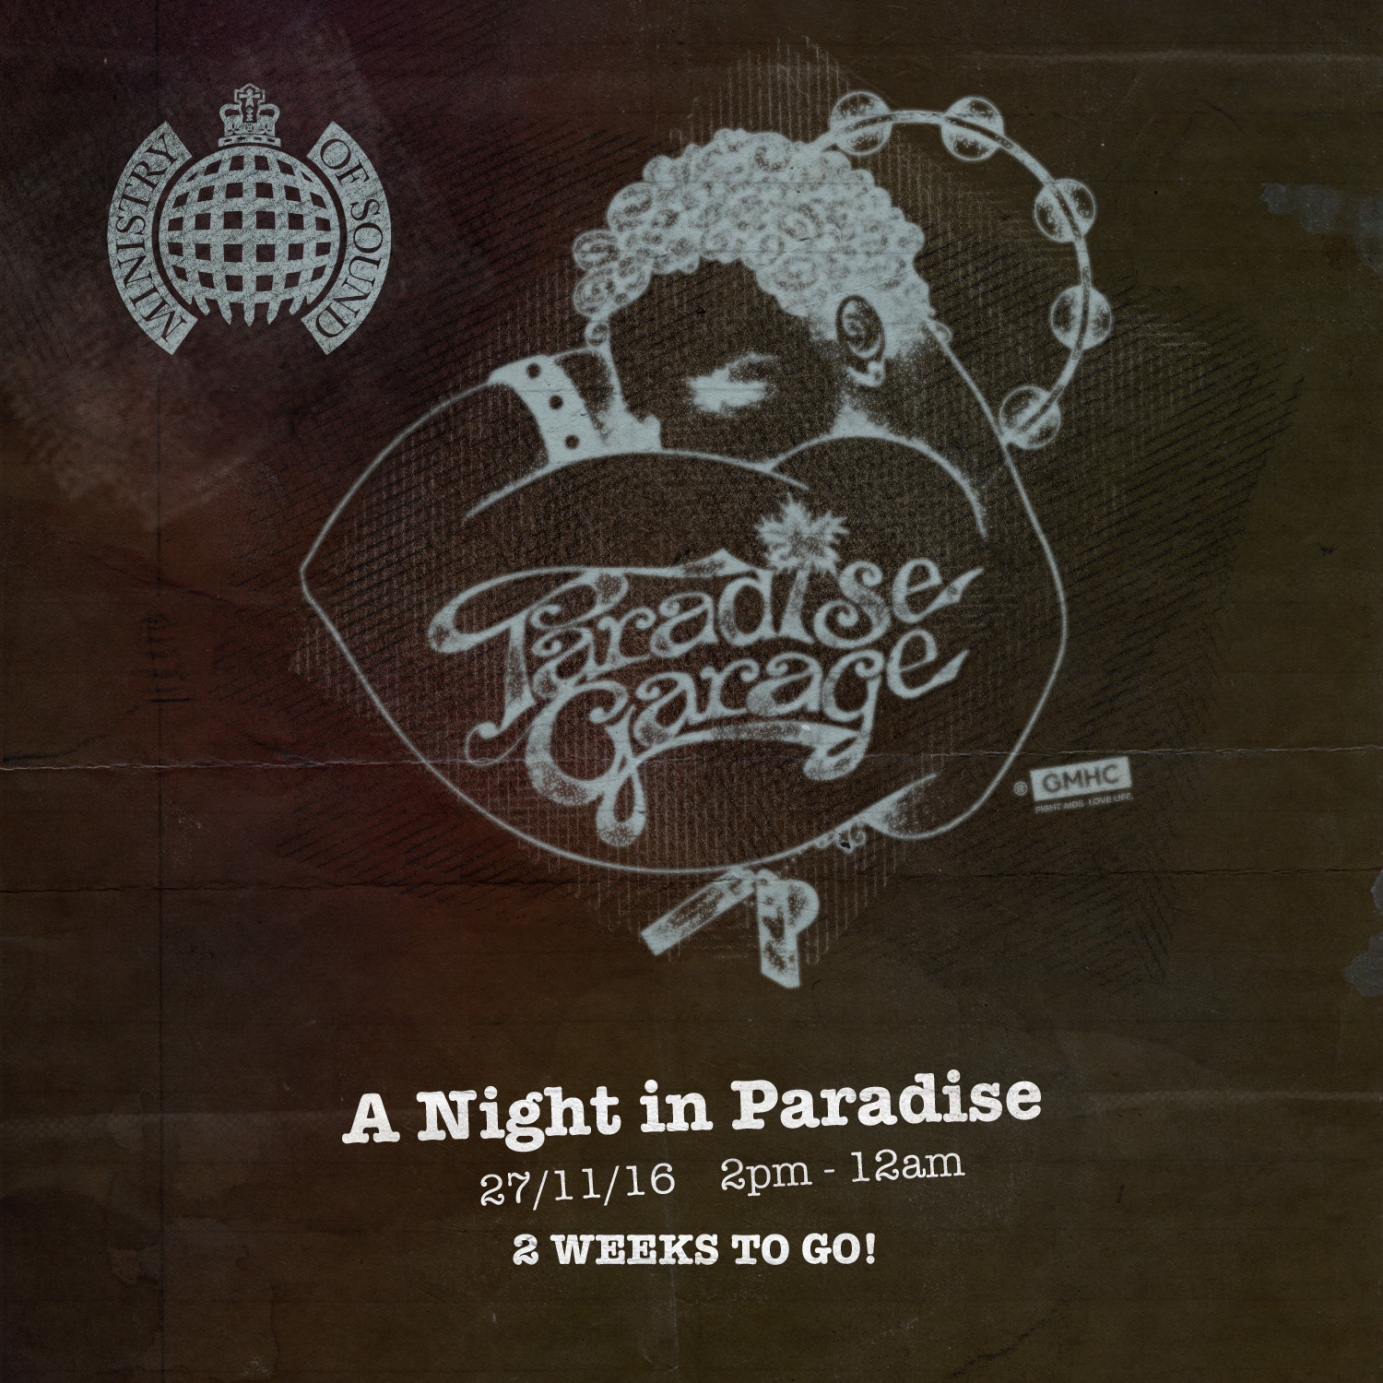 Paradise Garage @ Ministry Of Sound